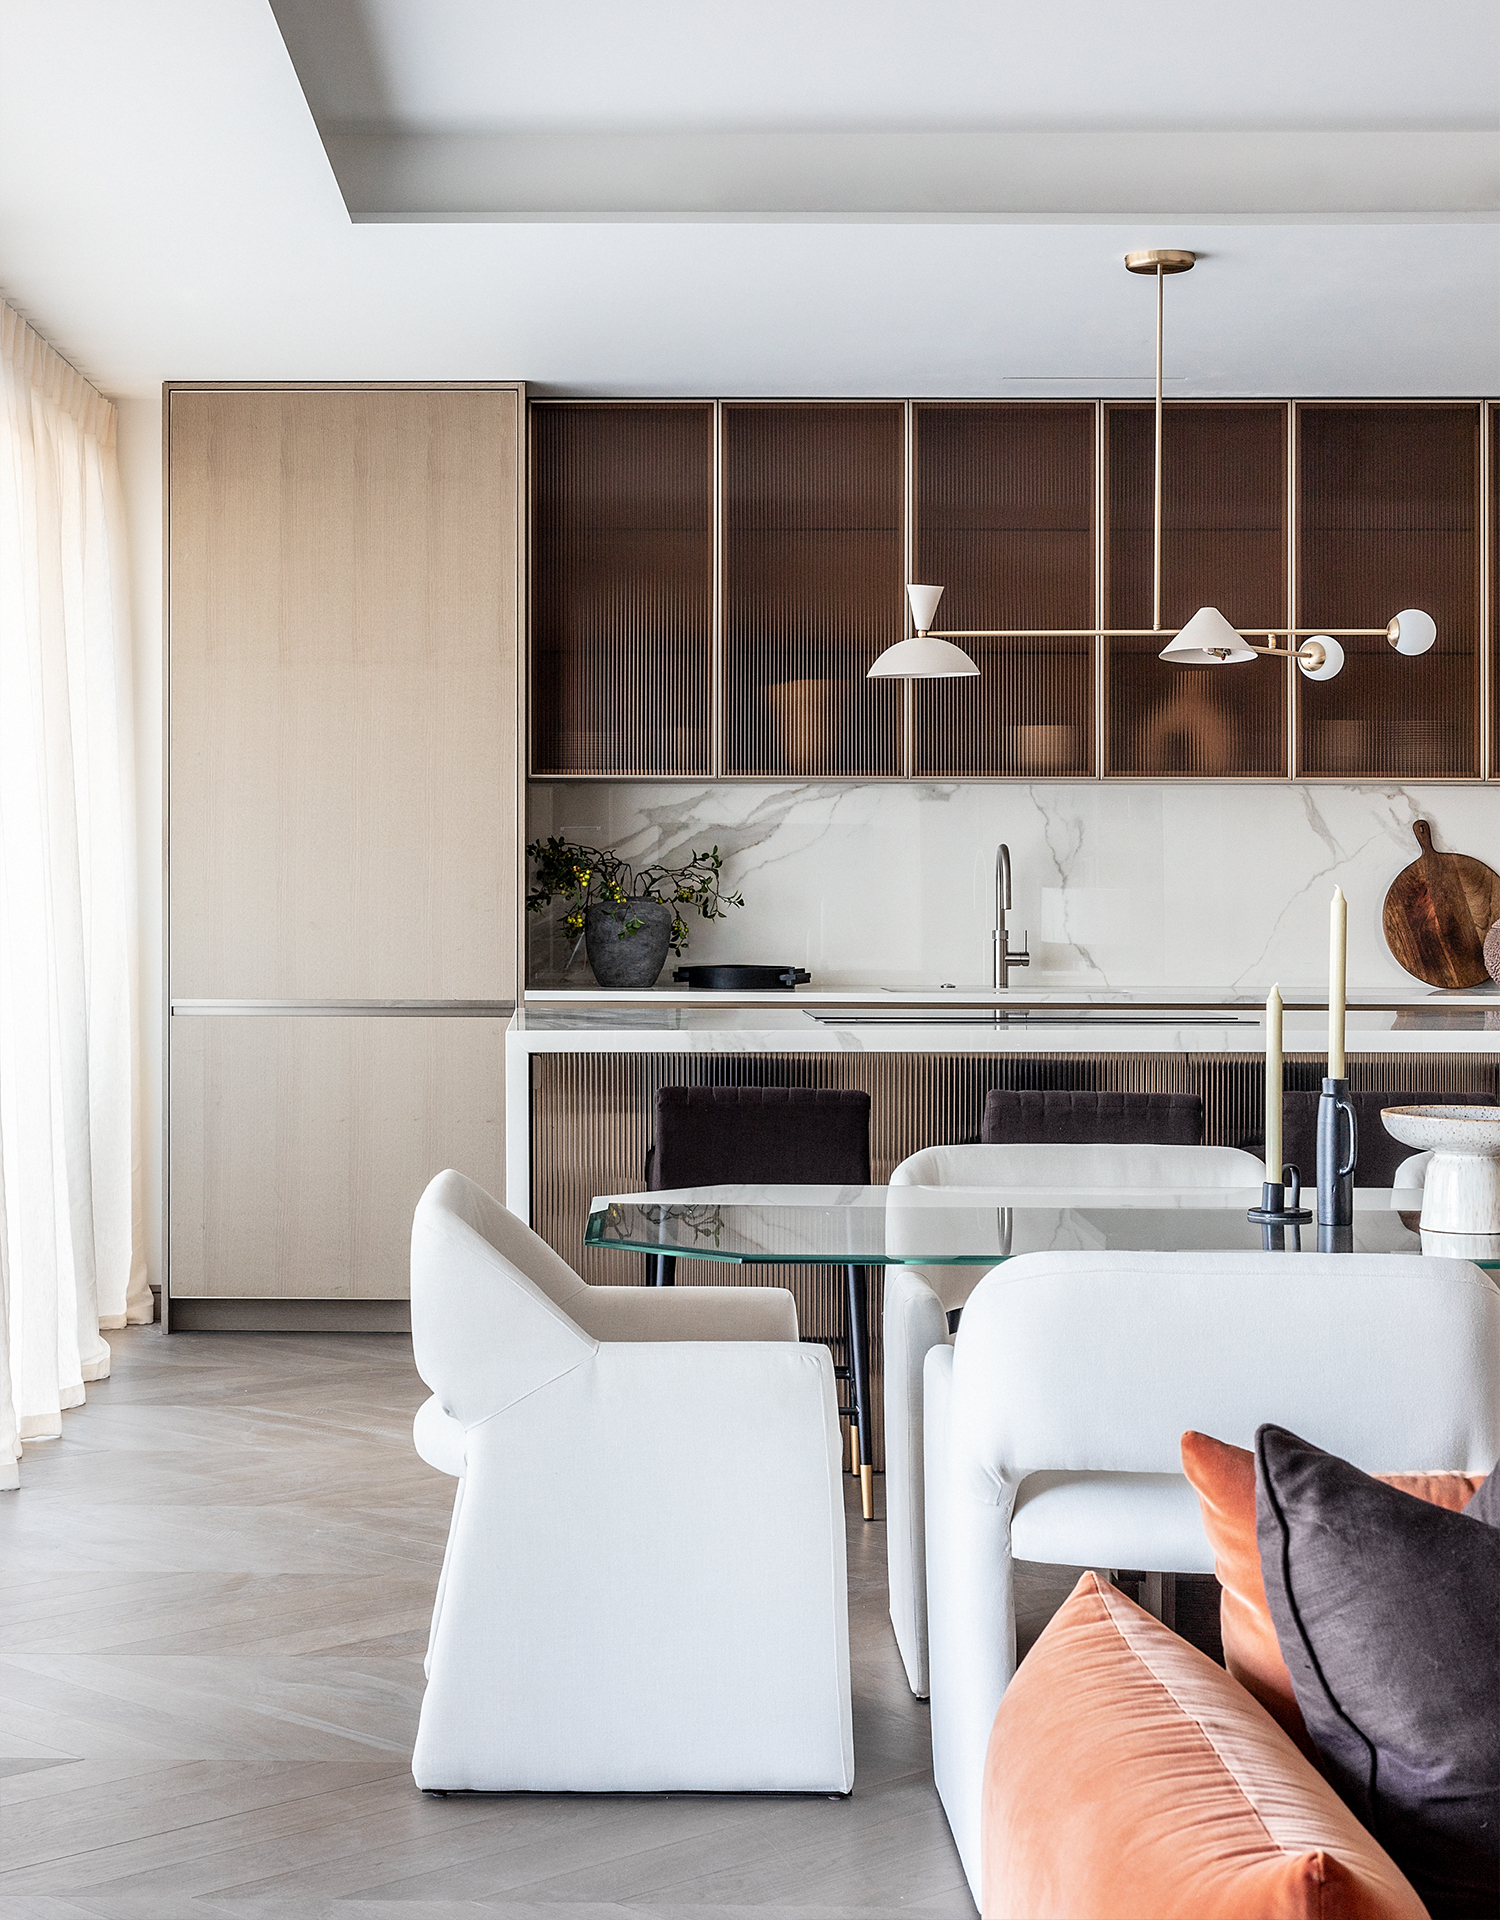 One St. John's Wood | Glass and wood combine to create a contemporary kitchen | Angel O'Donnell